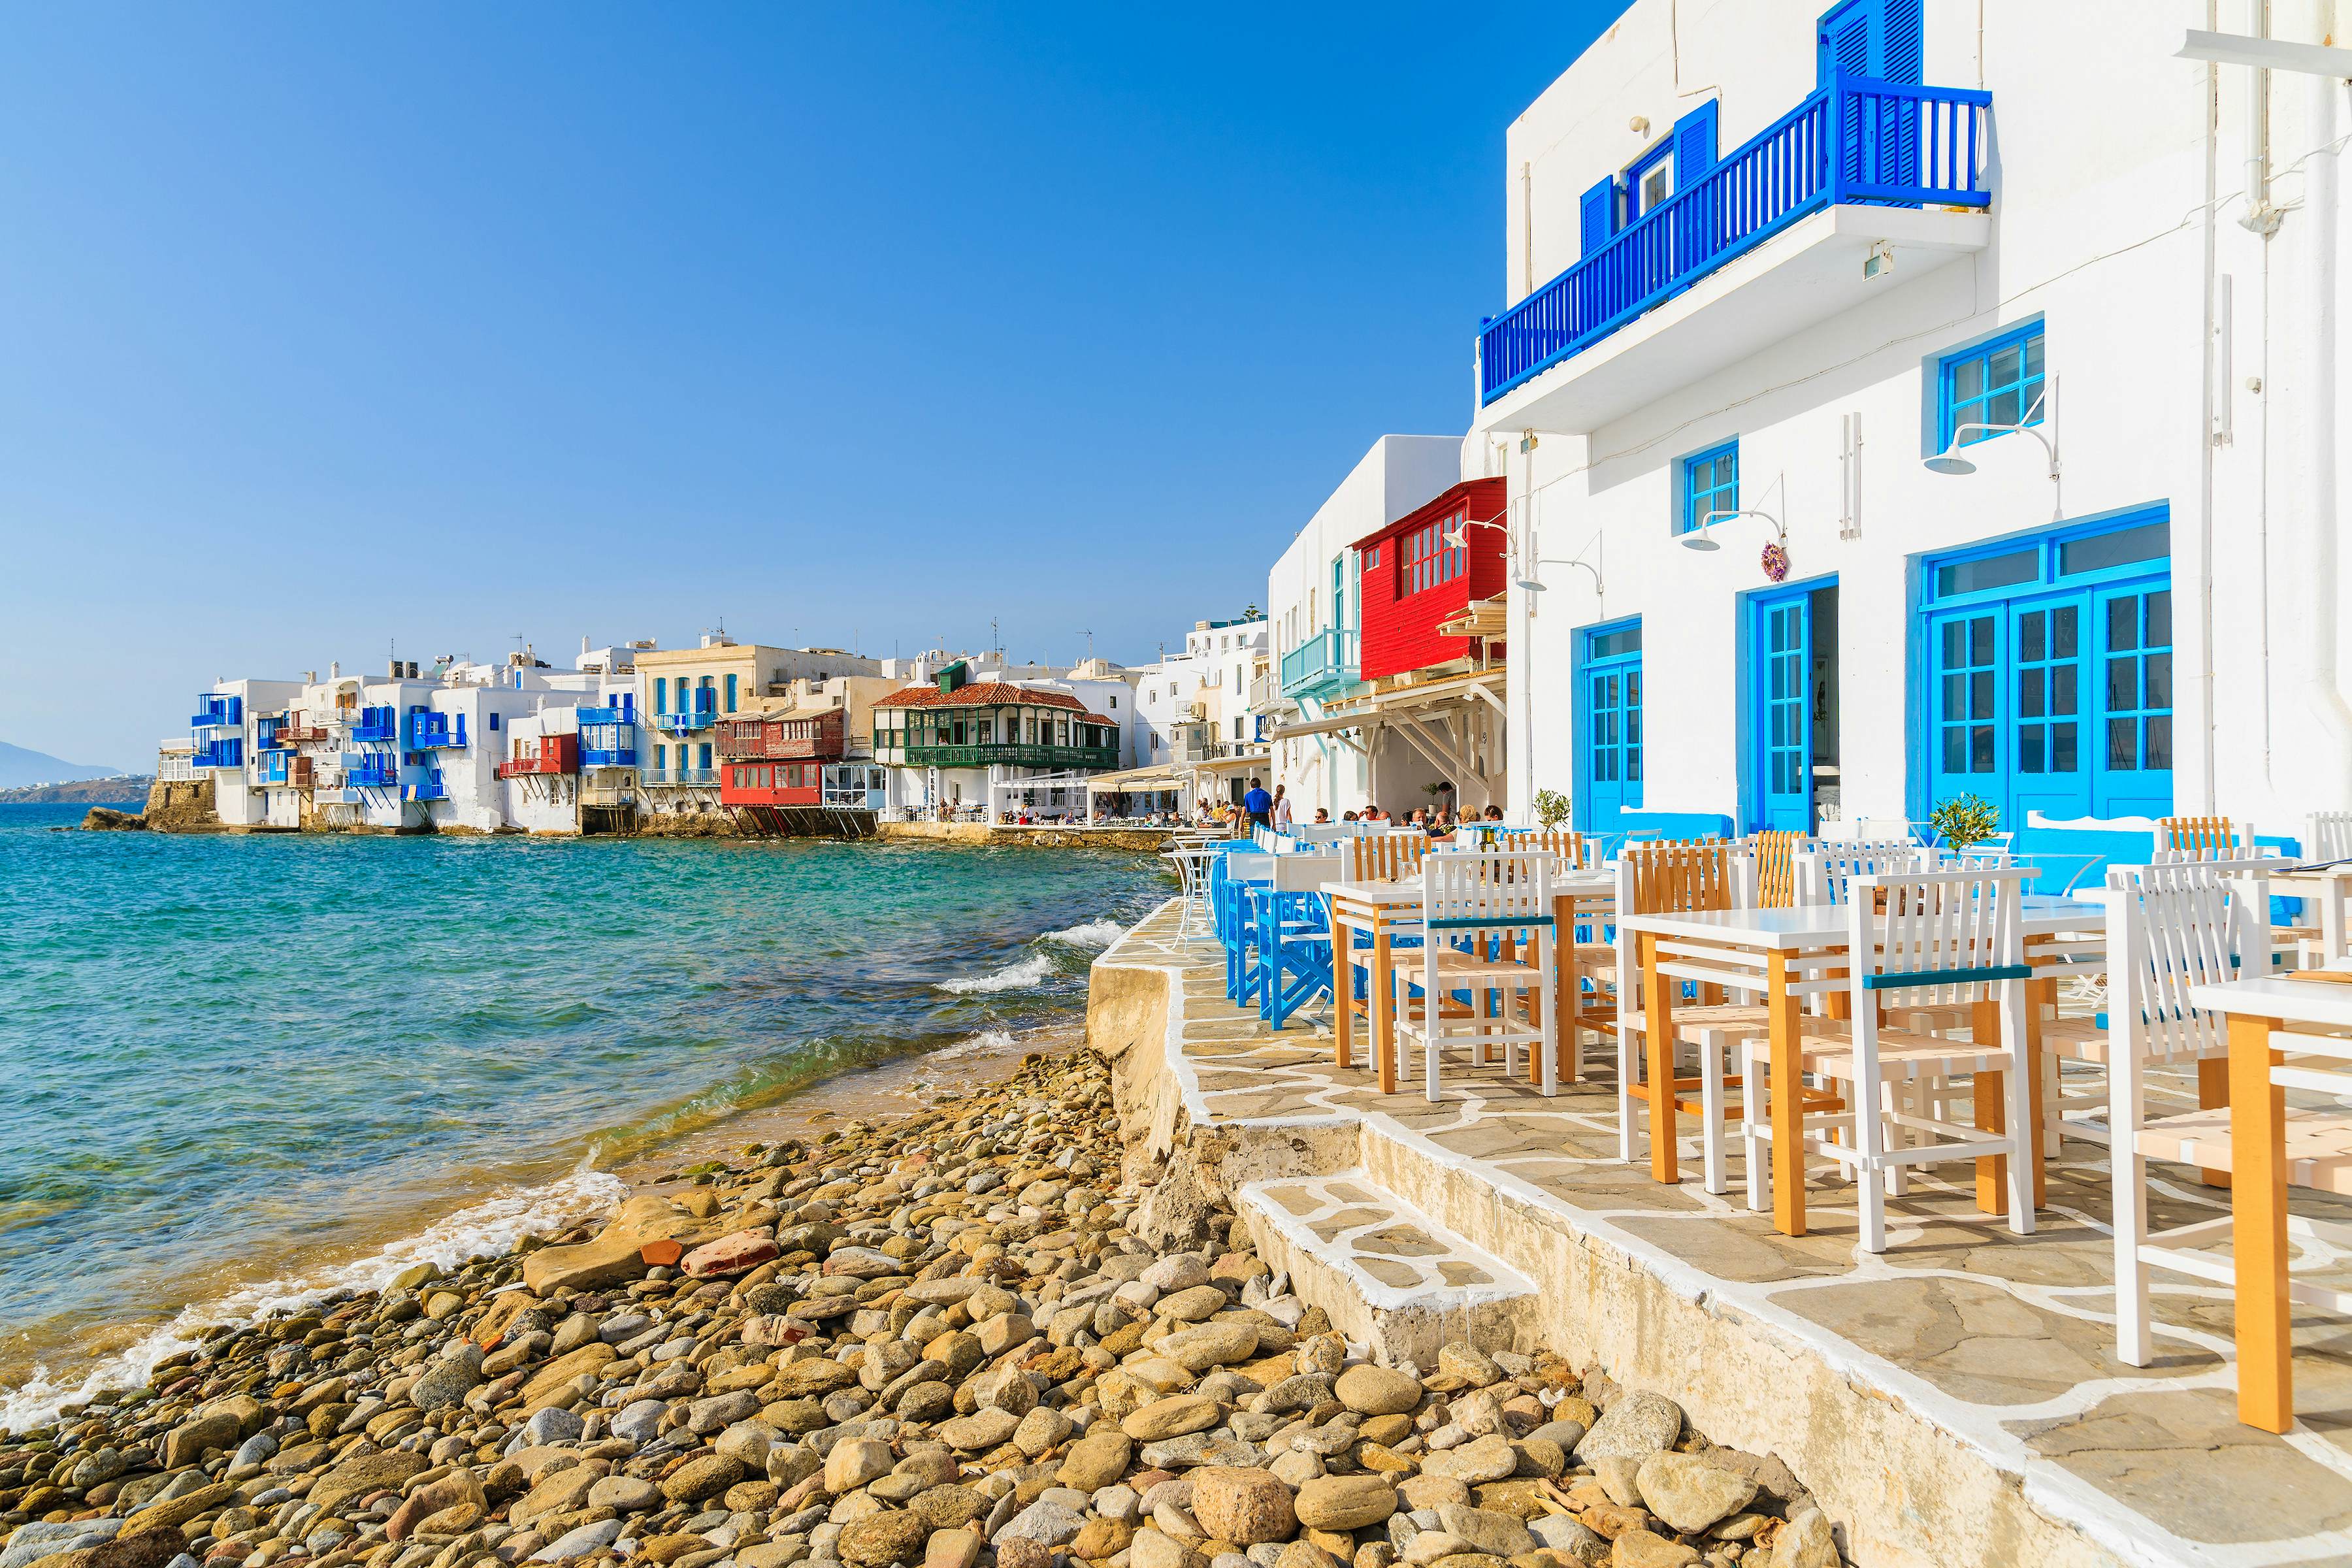 10 Great Mediterranean Cities To Visit This Summer - Fantastic